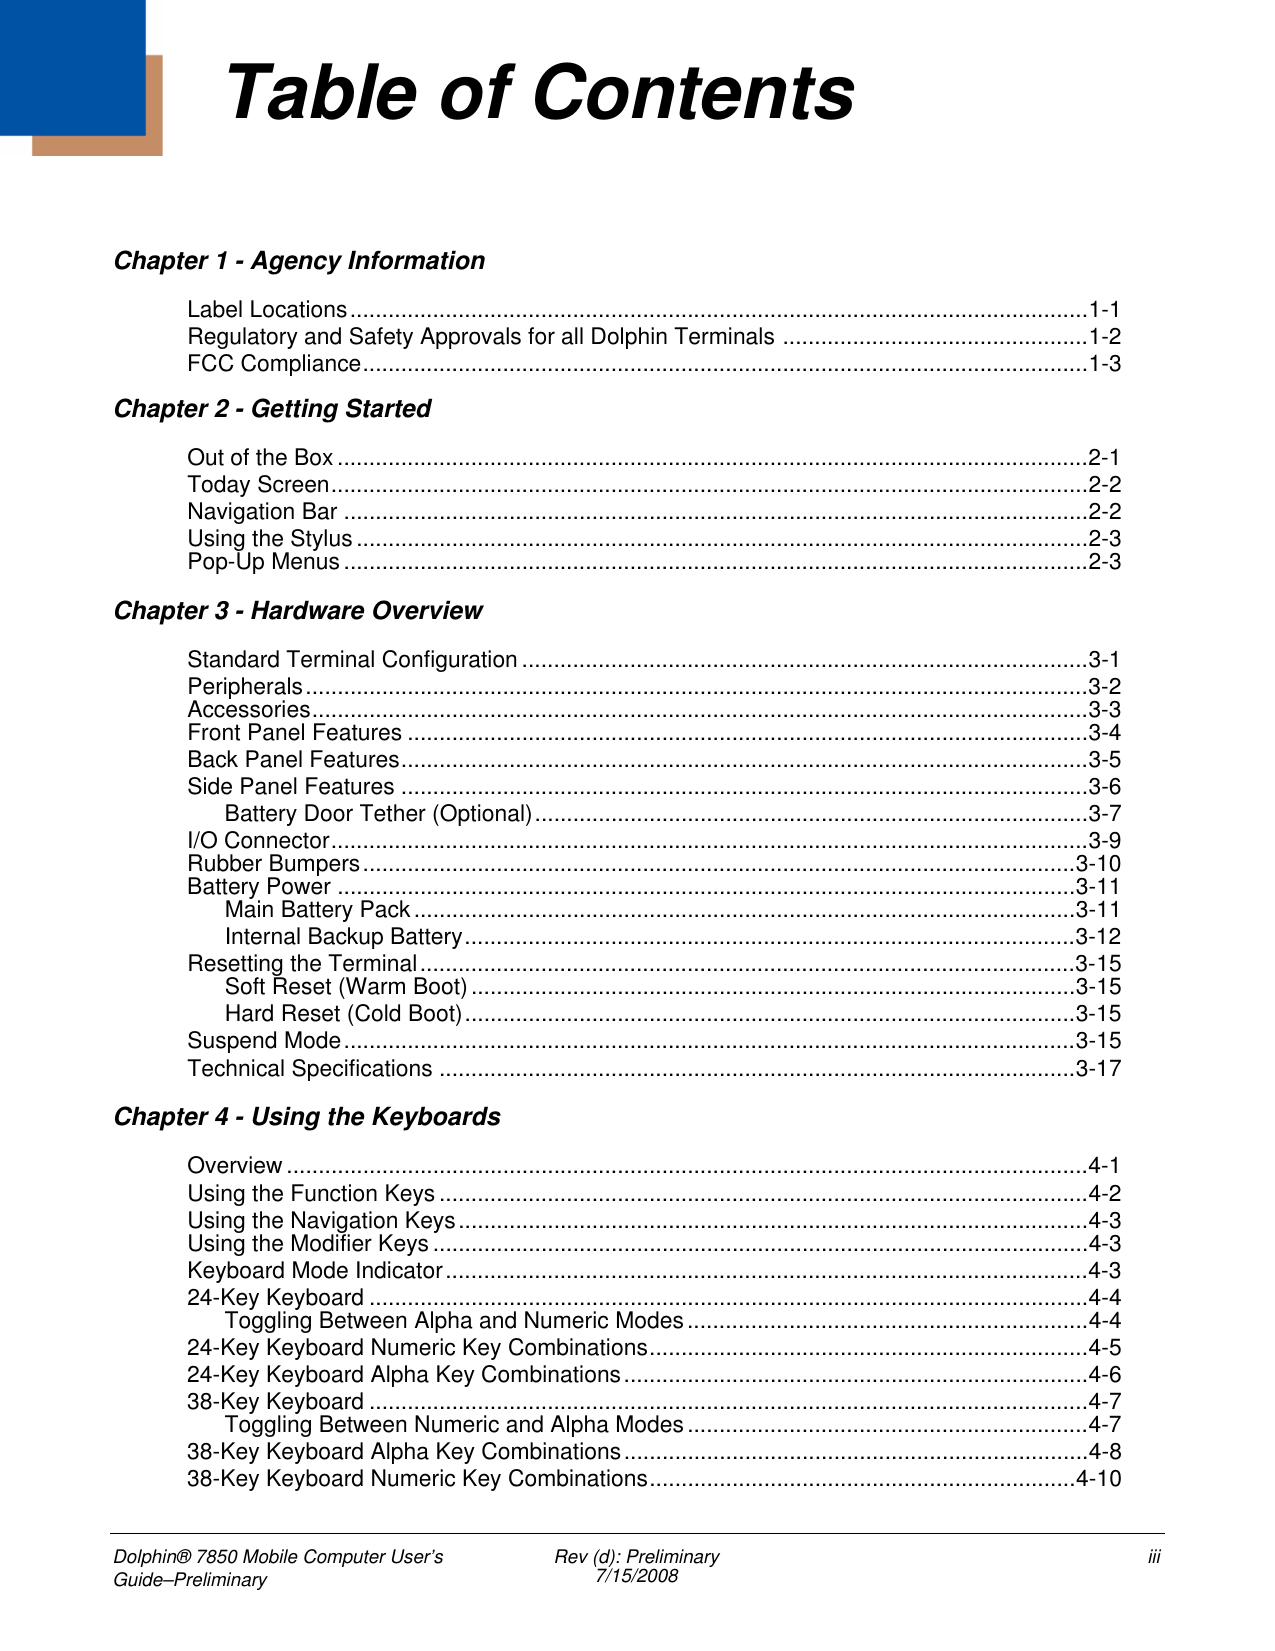 Dolphin® 7850 Mobile Computer User’s Guide–Preliminary Rev (d): Preliminary7/15/2008 iiiChapter 1 - Agency InformationLabel Locations....................................................................................................................1-1Regulatory and Safety Approvals for all Dolphin Terminals ................................................1-2FCC Compliance..................................................................................................................1-3Chapter 2 - Getting StartedOut of the Box......................................................................................................................2-1Today Screen.......................................................................................................................2-2Navigation Bar .....................................................................................................................2-2Using the Stylus ...................................................................................................................2-3Pop-Up Menus .....................................................................................................................2-3Chapter 3 - Hardware OverviewStandard Terminal Configuration.........................................................................................3-1Peripherals...........................................................................................................................3-2Accessories..........................................................................................................................3-3Front Panel Features ...........................................................................................................3-4Back Panel Features............................................................................................................3-5Side Panel Features ............................................................................................................3-6Battery Door Tether (Optional).......................................................................................3-7I/O Connector.......................................................................................................................3-9Rubber Bumpers................................................................................................................3-10Battery Power ....................................................................................................................3-11Main Battery Pack........................................................................................................3-11Internal Backup Battery................................................................................................3-12Resetting the Terminal.......................................................................................................3-15Soft Reset (Warm Boot)...............................................................................................3-15Hard Reset (Cold Boot)................................................................................................3-15Suspend Mode...................................................................................................................3-15Technical Specifications ....................................................................................................3-17Chapter 4 - Using the KeyboardsOverview ..............................................................................................................................4-1Using the Function Keys ......................................................................................................4-2Using the Navigation Keys...................................................................................................4-3Using the Modifier Keys .......................................................................................................4-3Keyboard Mode Indicator.....................................................................................................4-324-Key Keyboard .................................................................................................................4-4Toggling Between Alpha and Numeric Modes...............................................................4-424-Key Keyboard Numeric Key Combinations.....................................................................4-524-Key Keyboard Alpha Key Combinations.........................................................................4-638-Key Keyboard .................................................................................................................4-7Toggling Between Numeric and Alpha Modes...............................................................4-738-Key Keyboard Alpha Key Combinations.........................................................................4-838-Key Keyboard Numeric Key Combinations...................................................................4-10Table of Contents